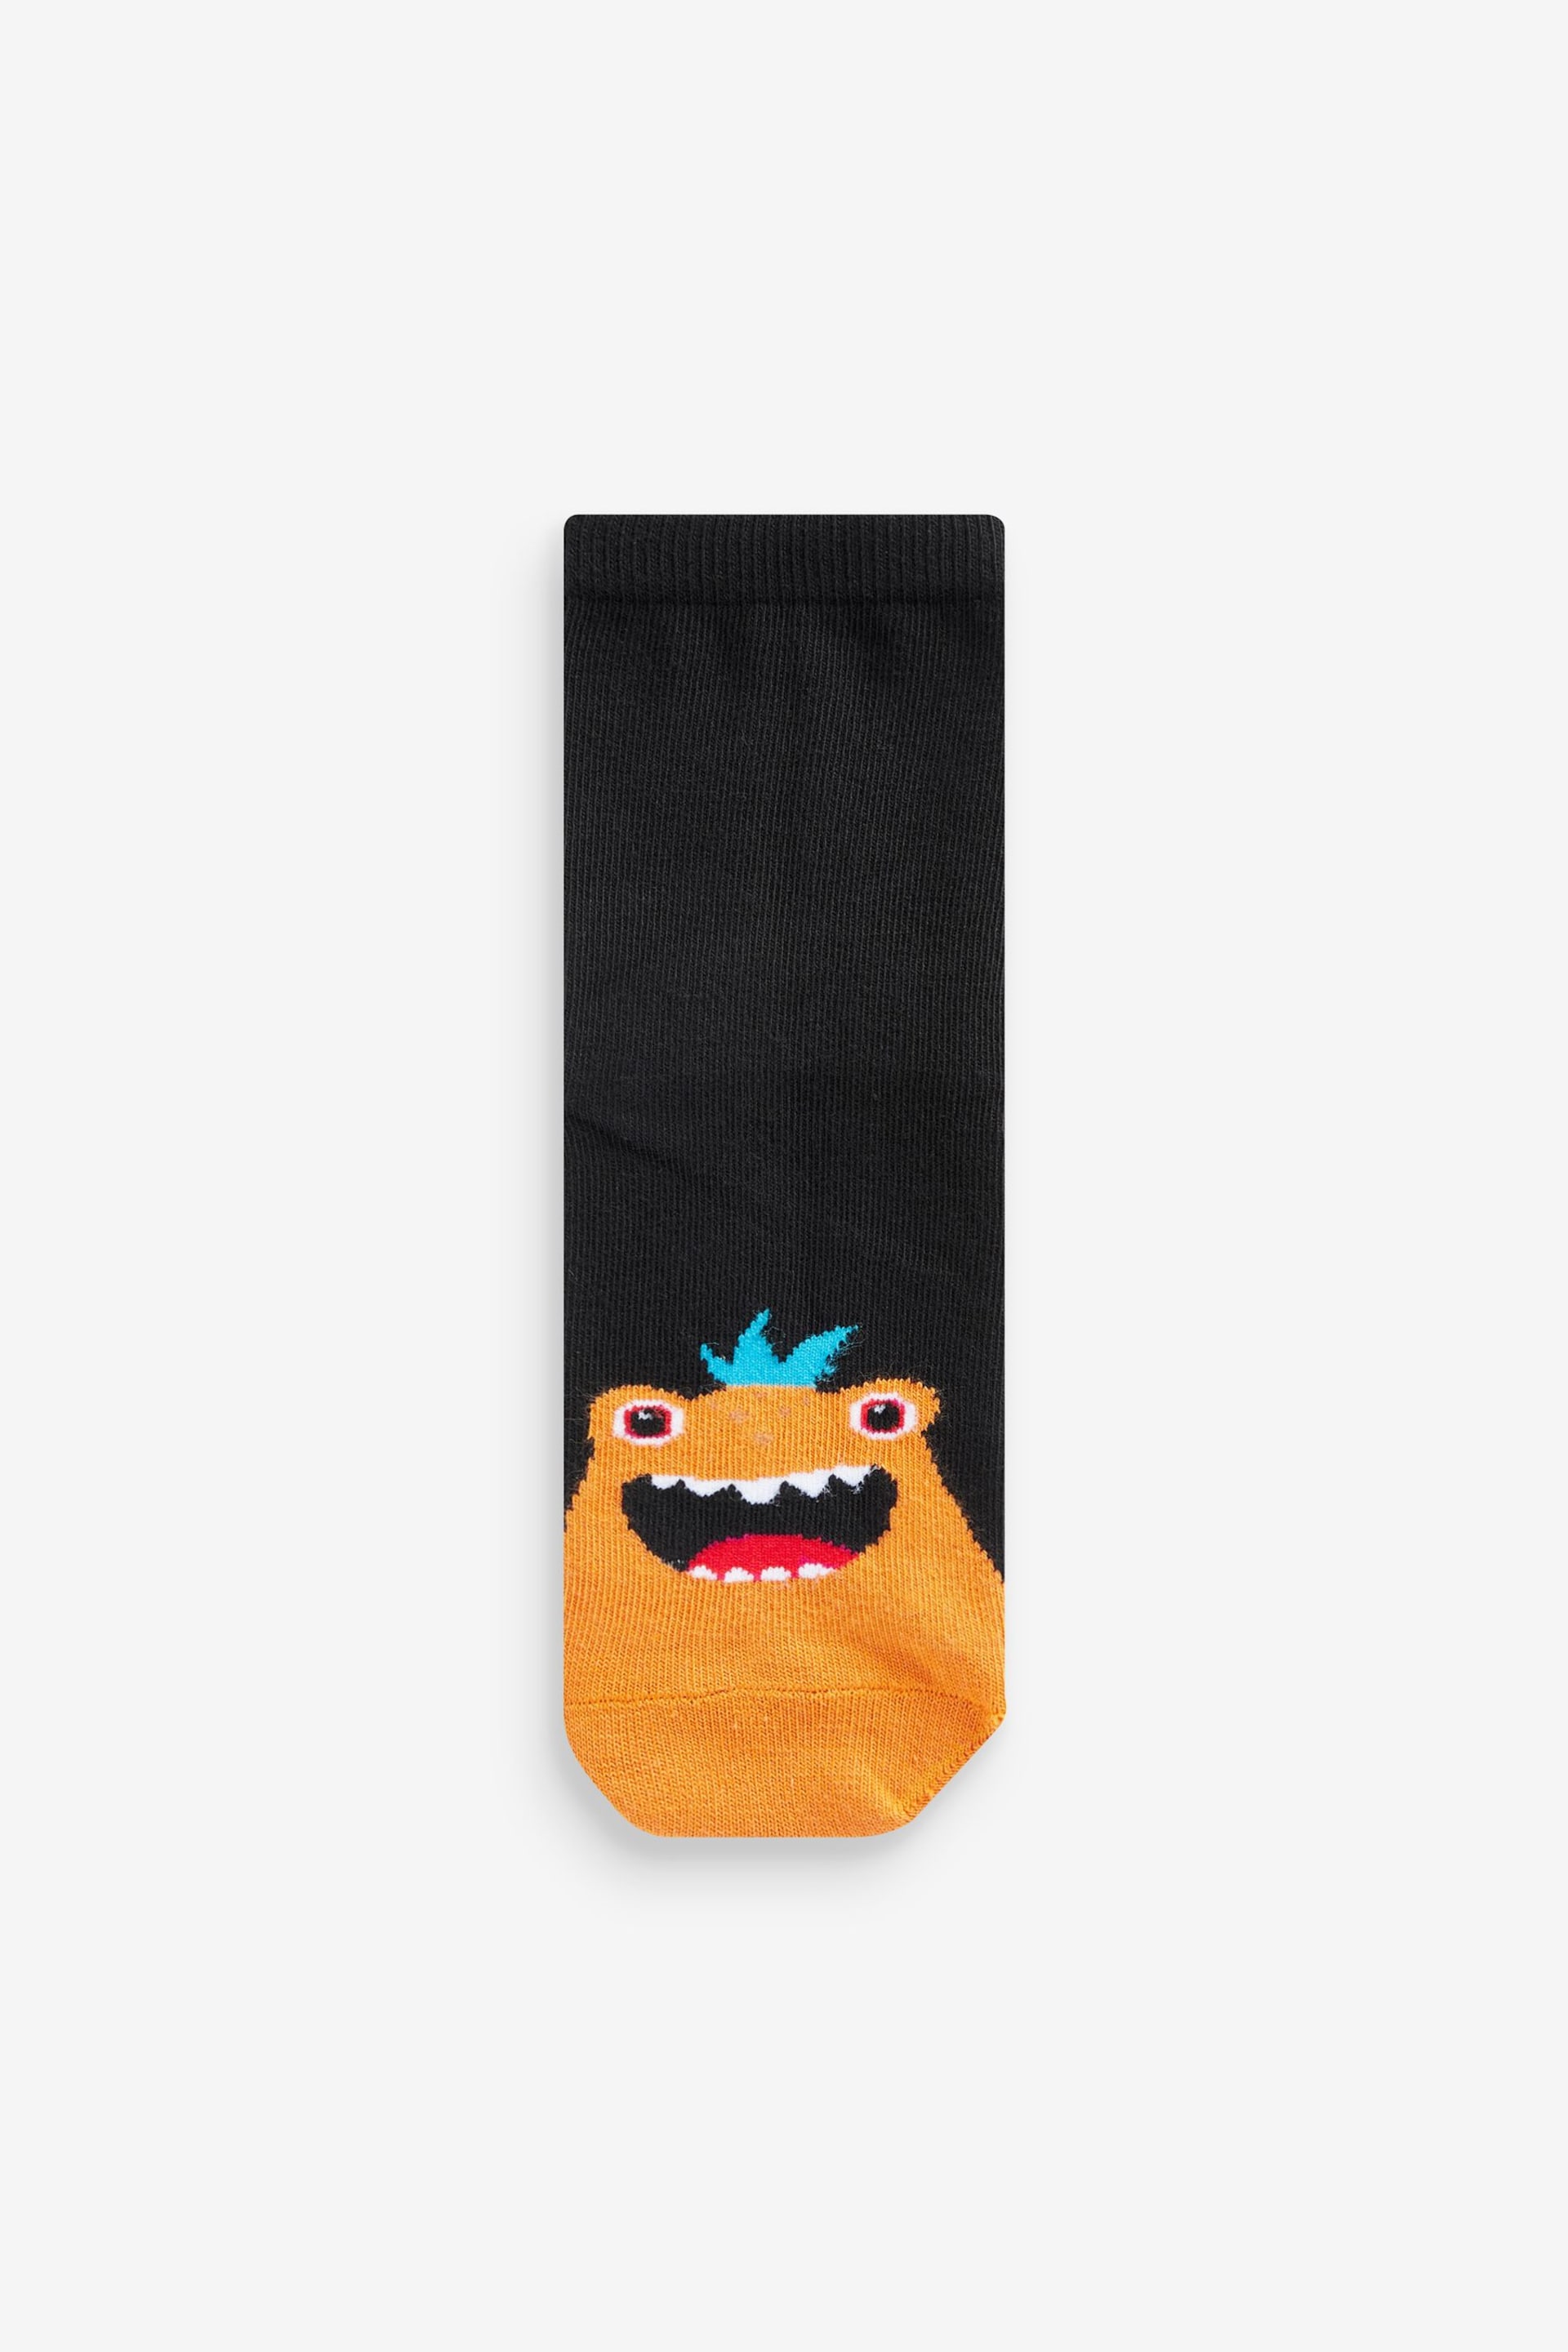 Black/Bright Monsters Cotton Rich Socks 10 Pack - Image 4 of 11